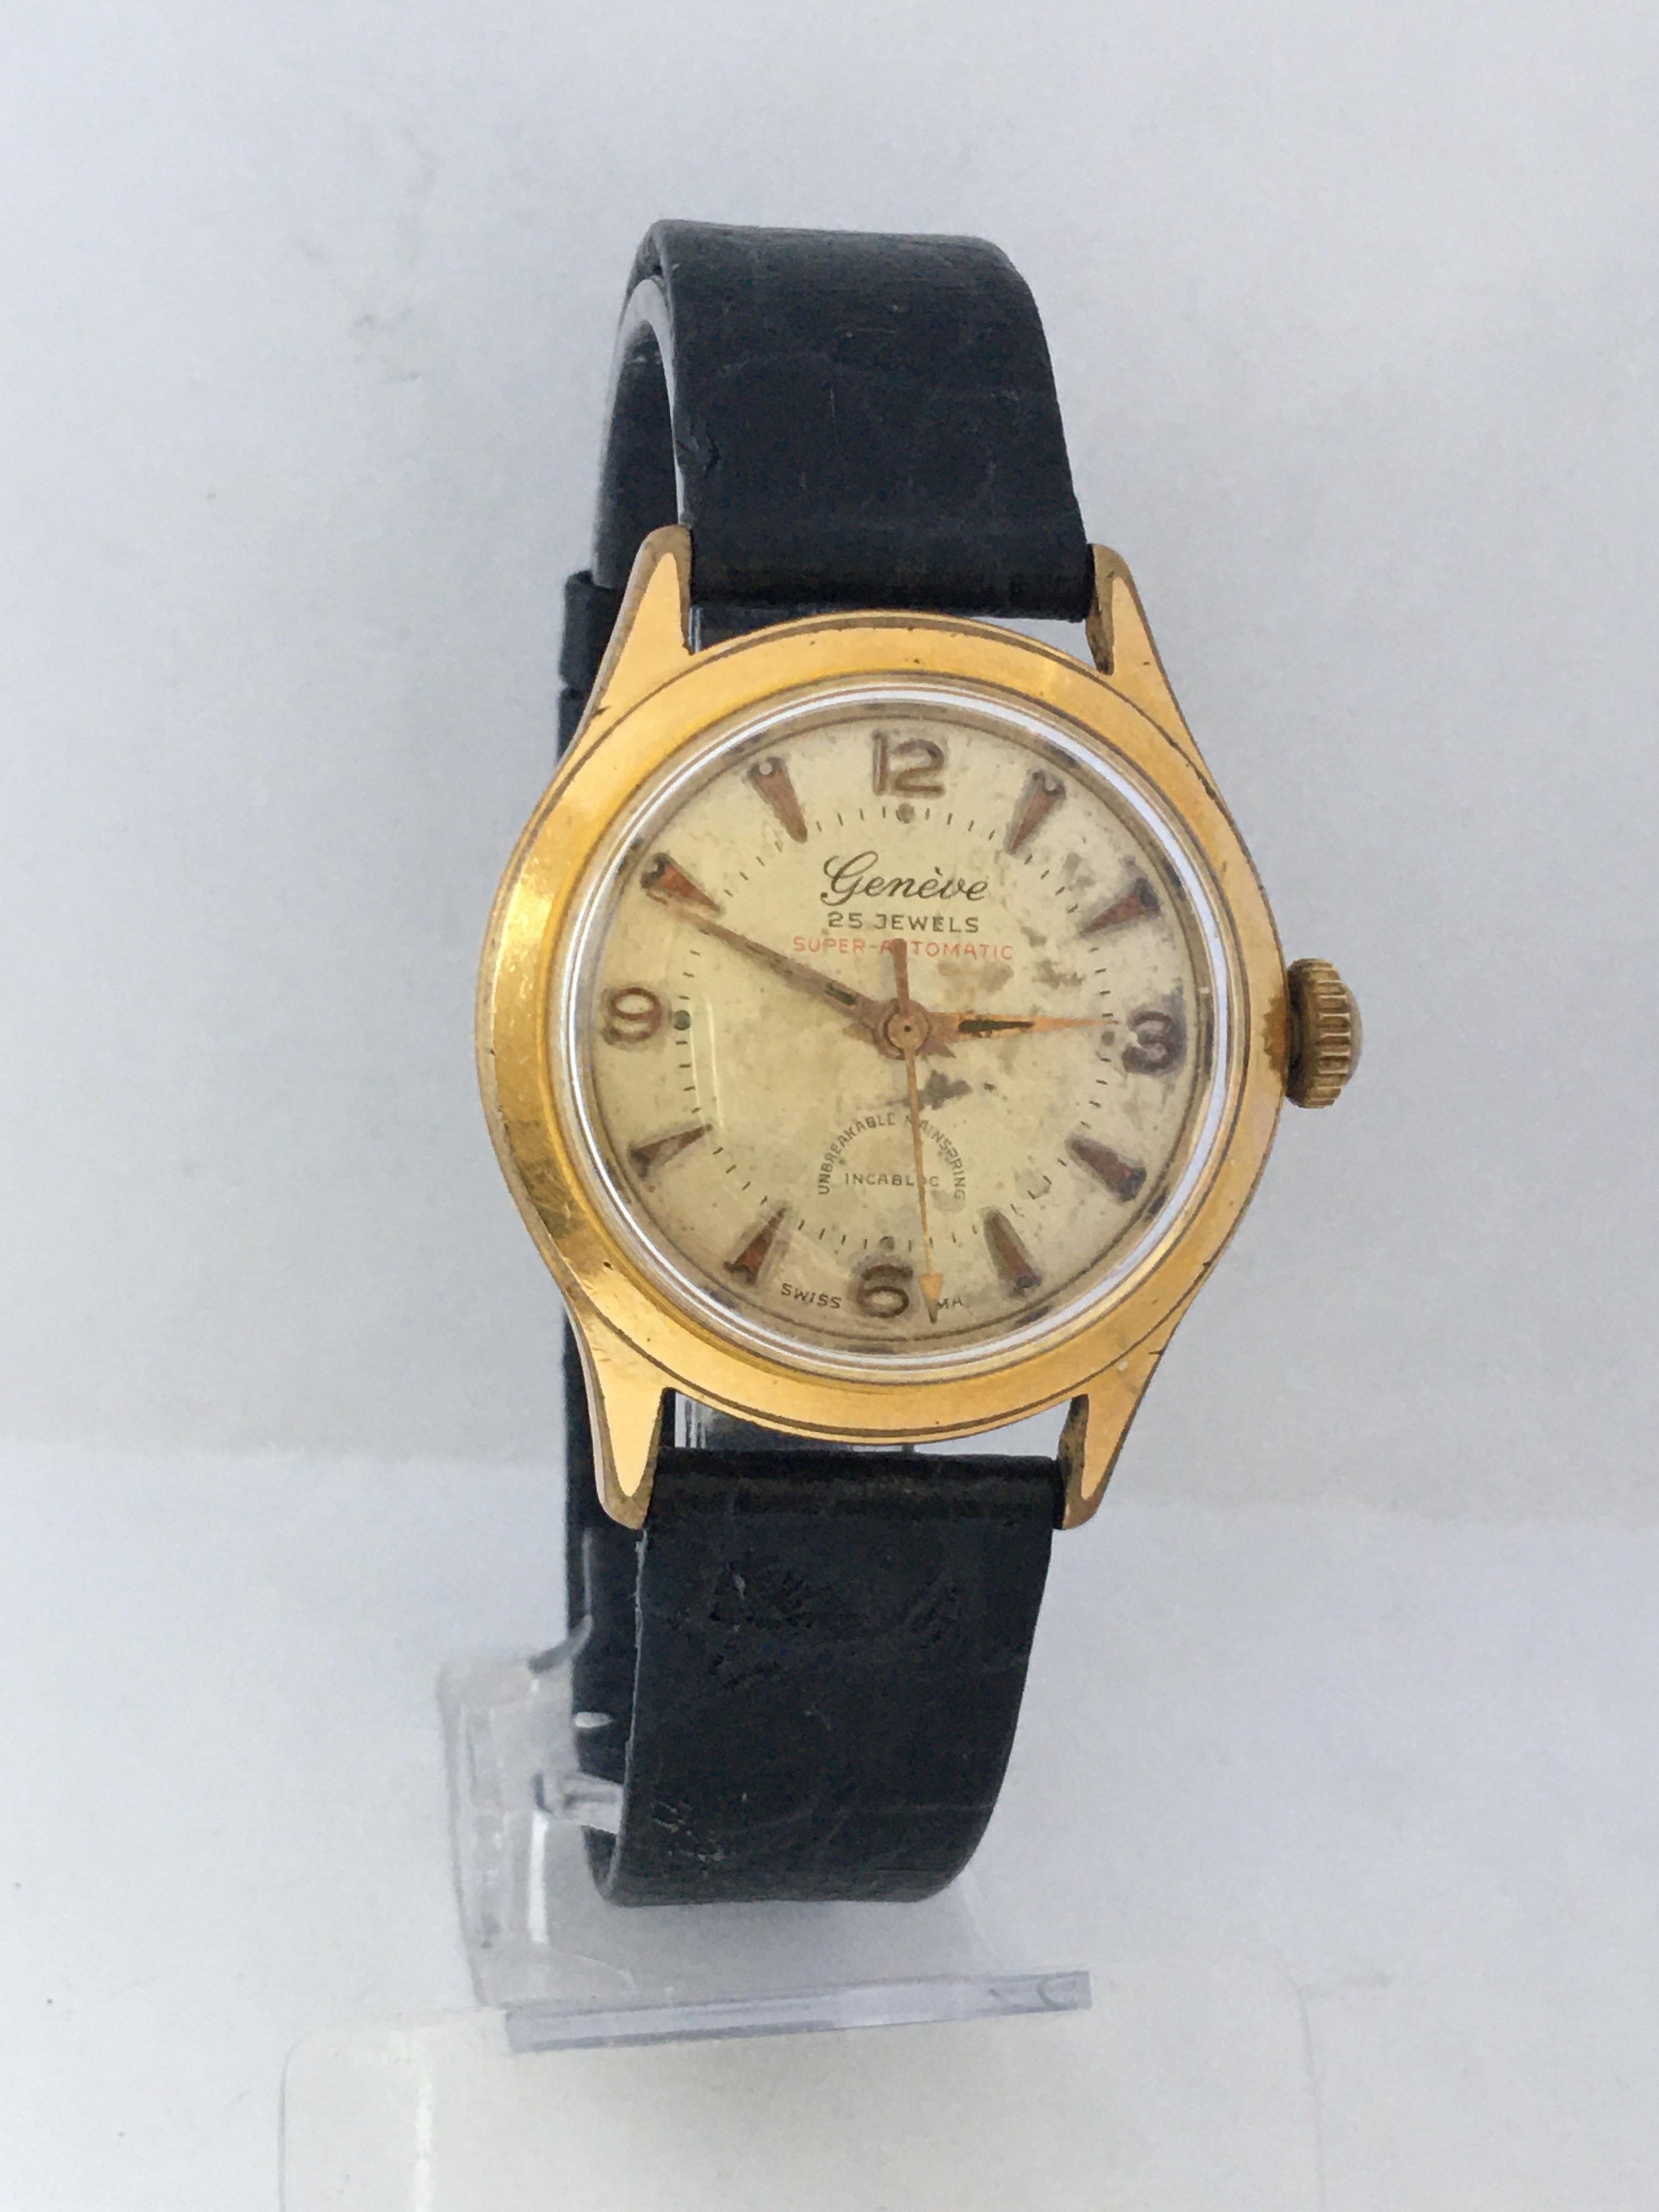 Vintage 1940s Gold Plated and Stainless Steel Back Genève Automatic Watch 5